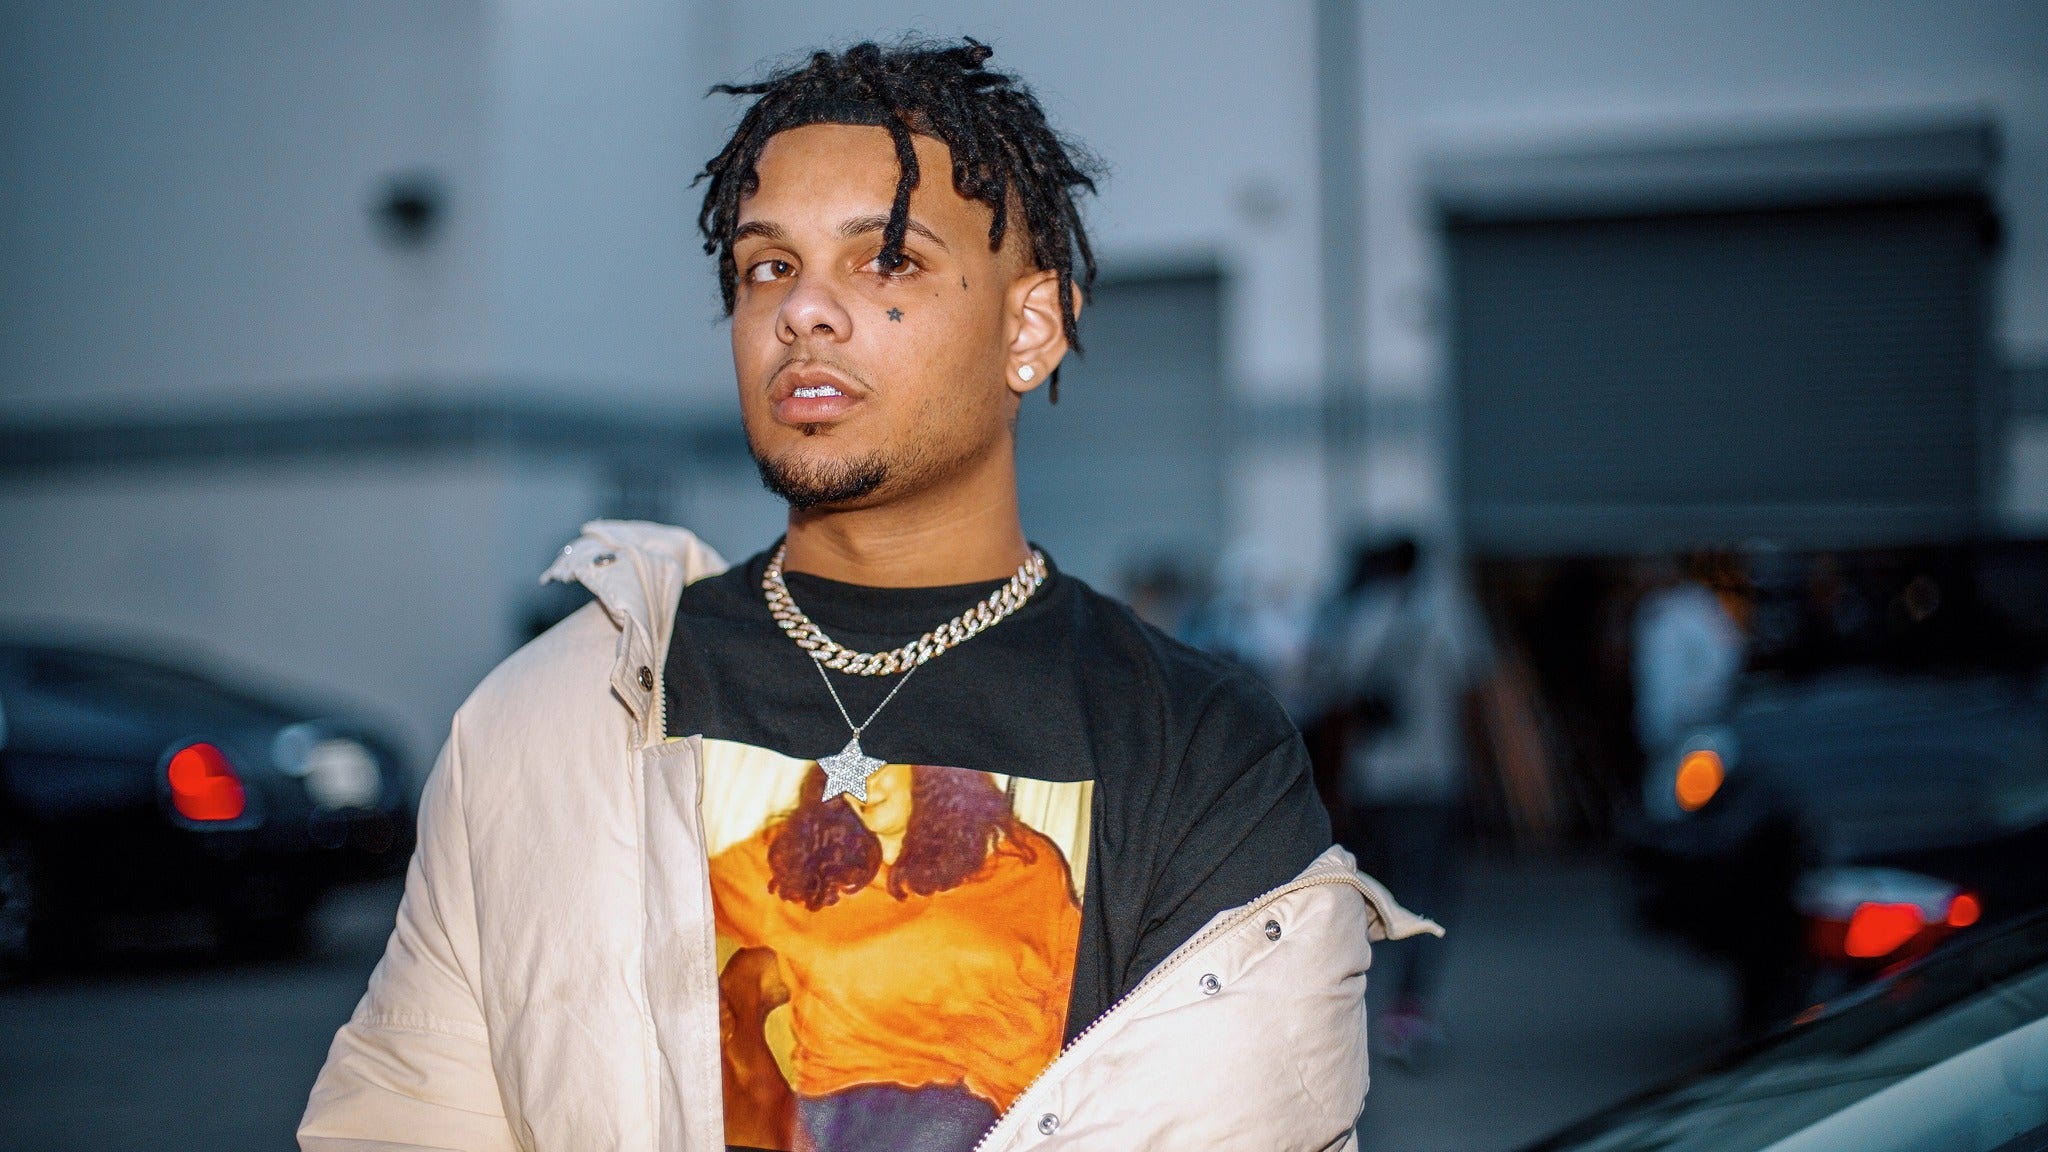 Image used with permission from Ticketmaster | Smokepurpp: Live in London tickets